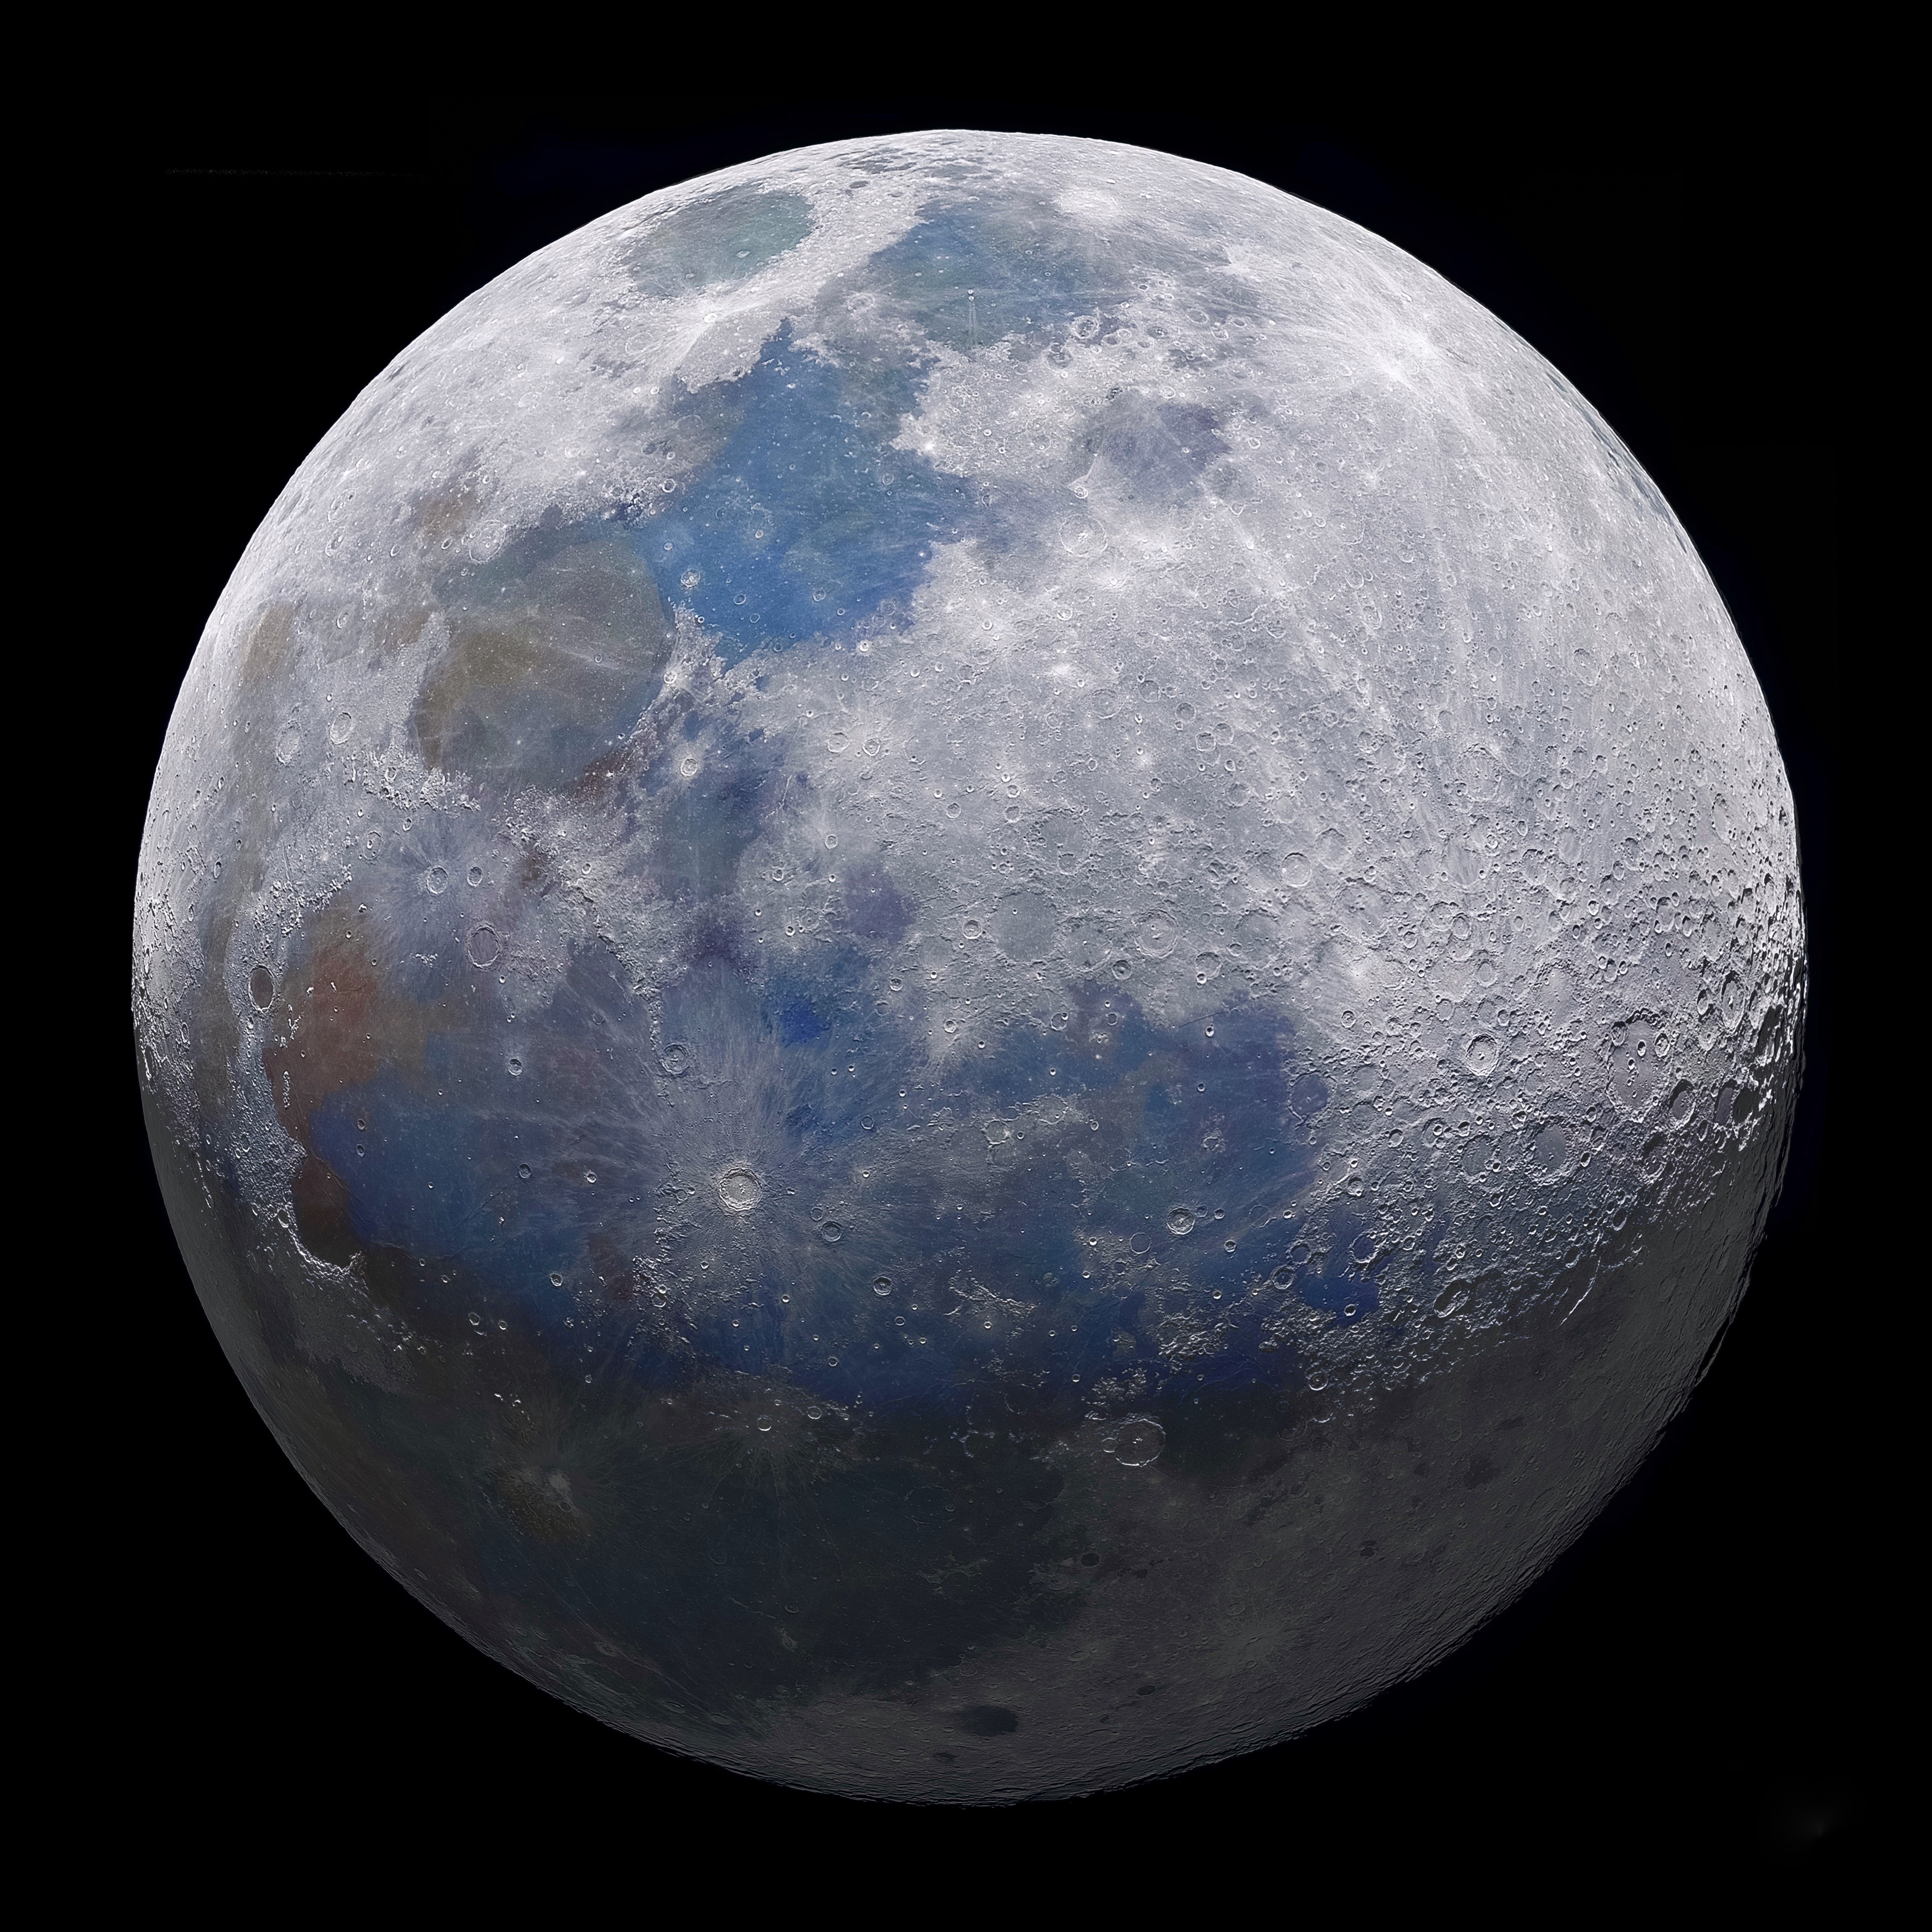 A composite image of the Moon. (Image: Rich Addis)